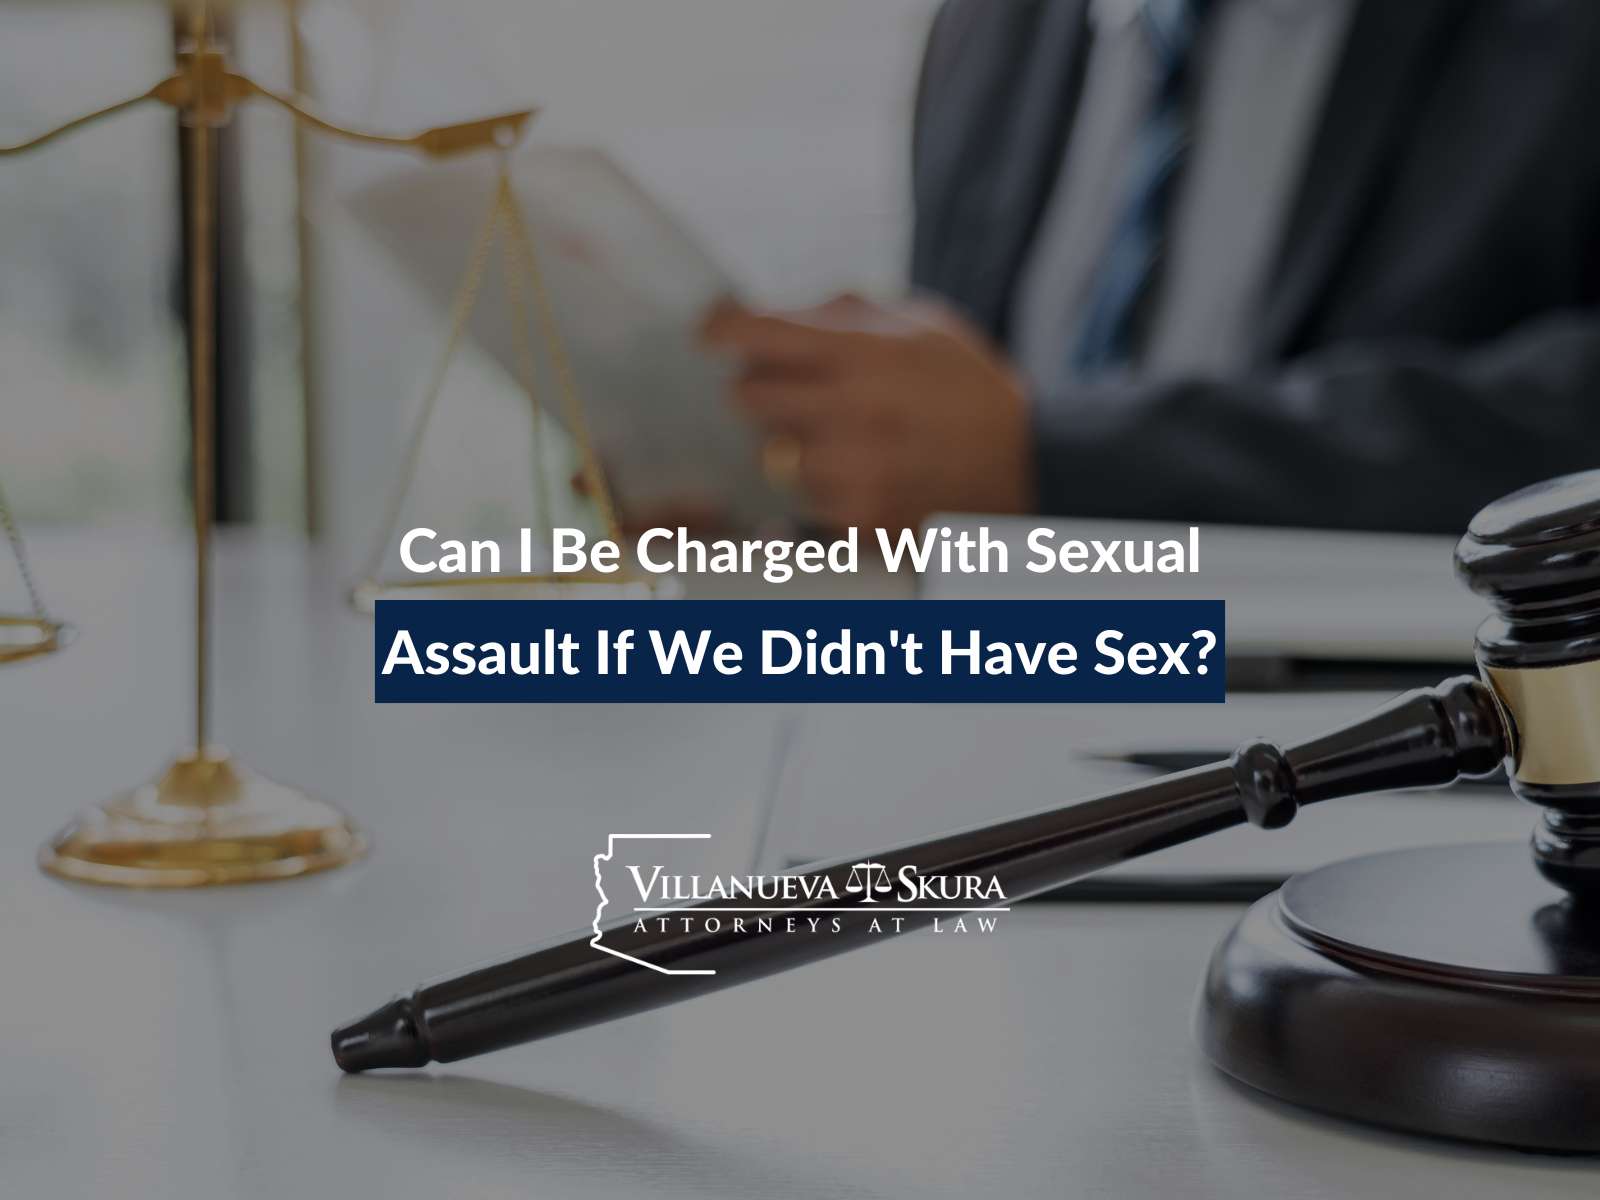 Can I Be Charged With Sexual Assault If We Didn't Have Sex?